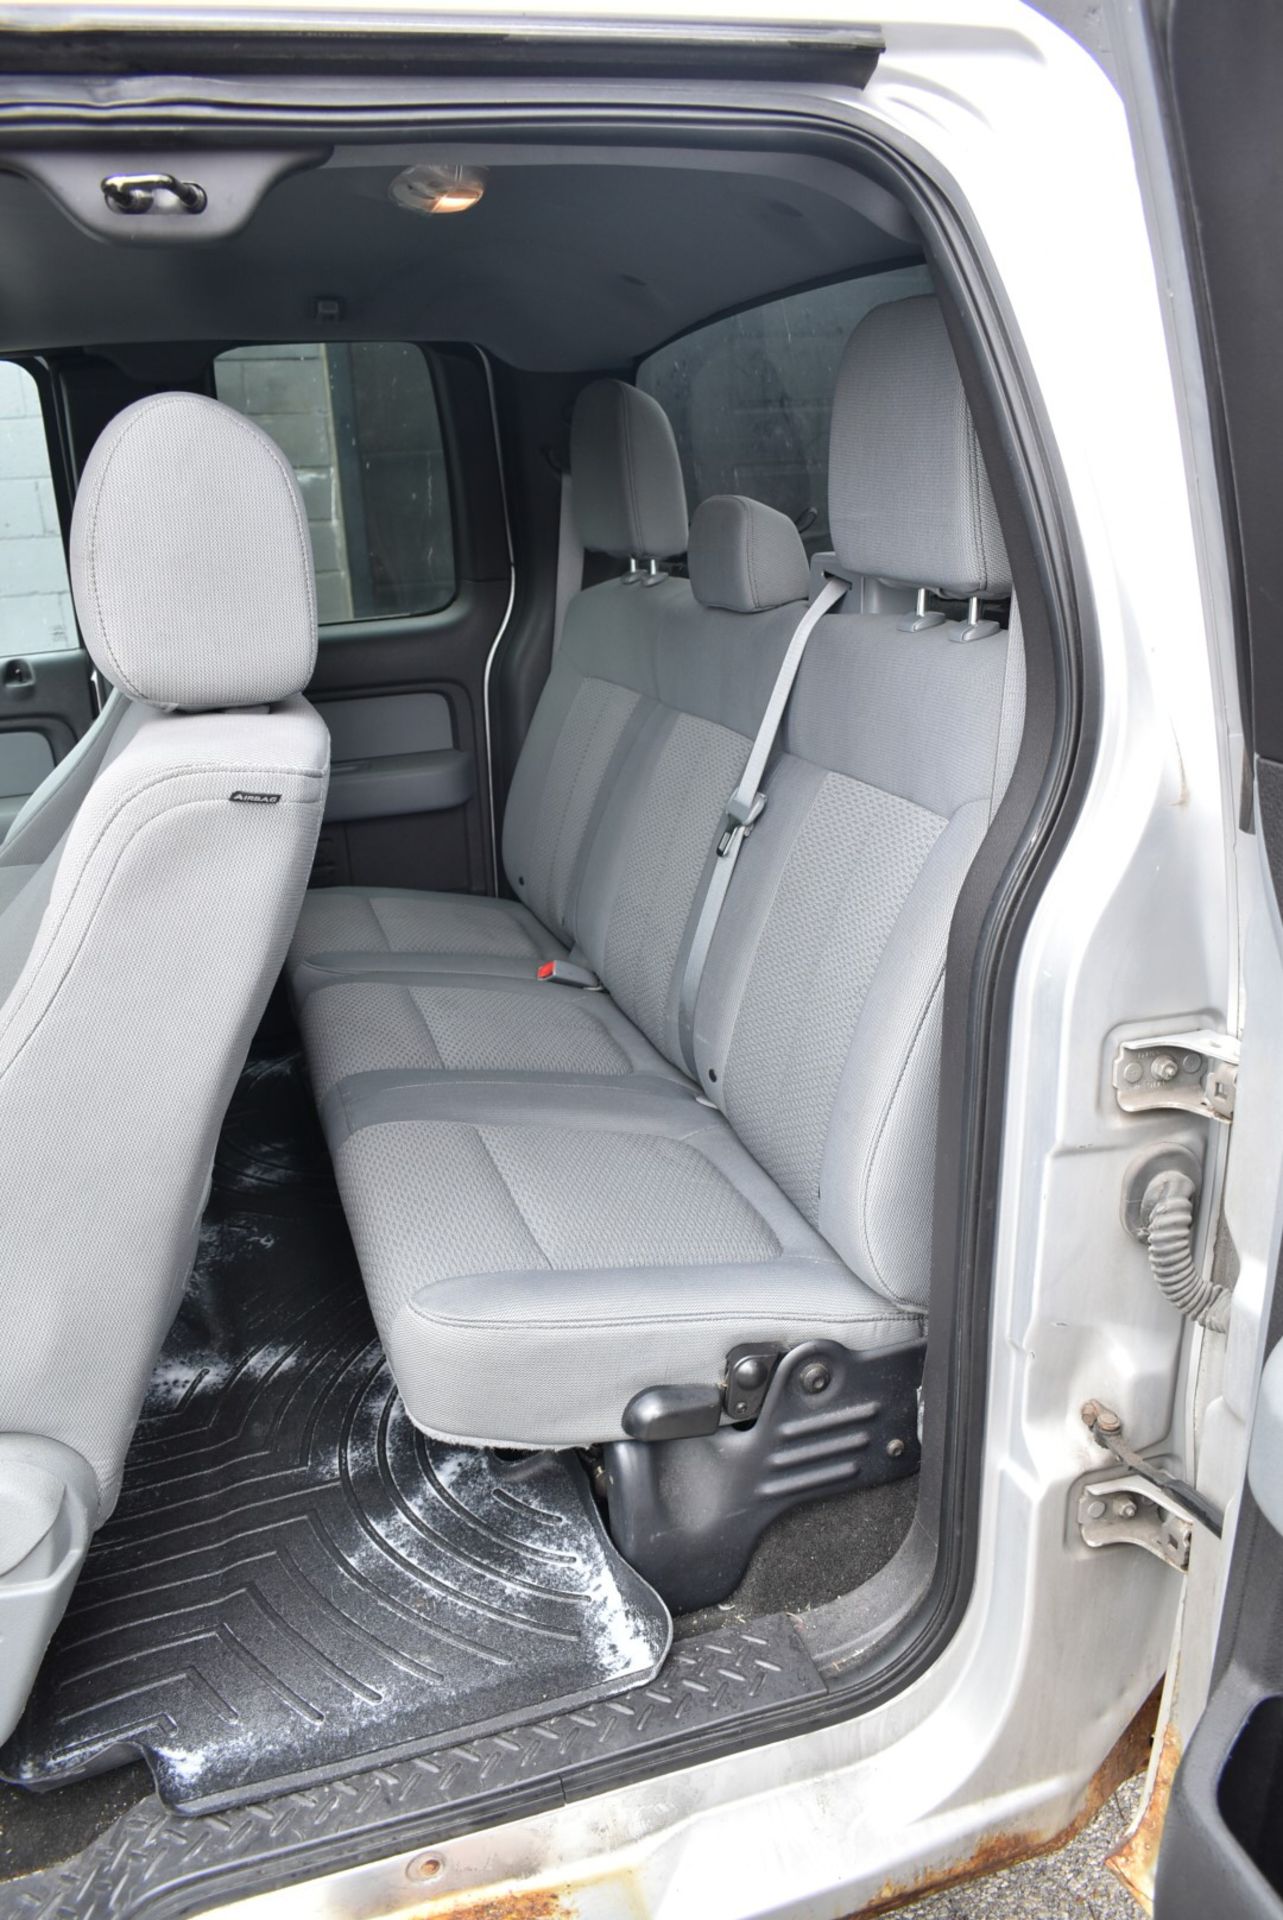 FORD (2014) F150XLT EXTENDED CAB PICKUP TRUCK WITH 3.7 LITER V6 ENGINE, 4X4, AUTO TRANSMISSION, - Image 8 of 13